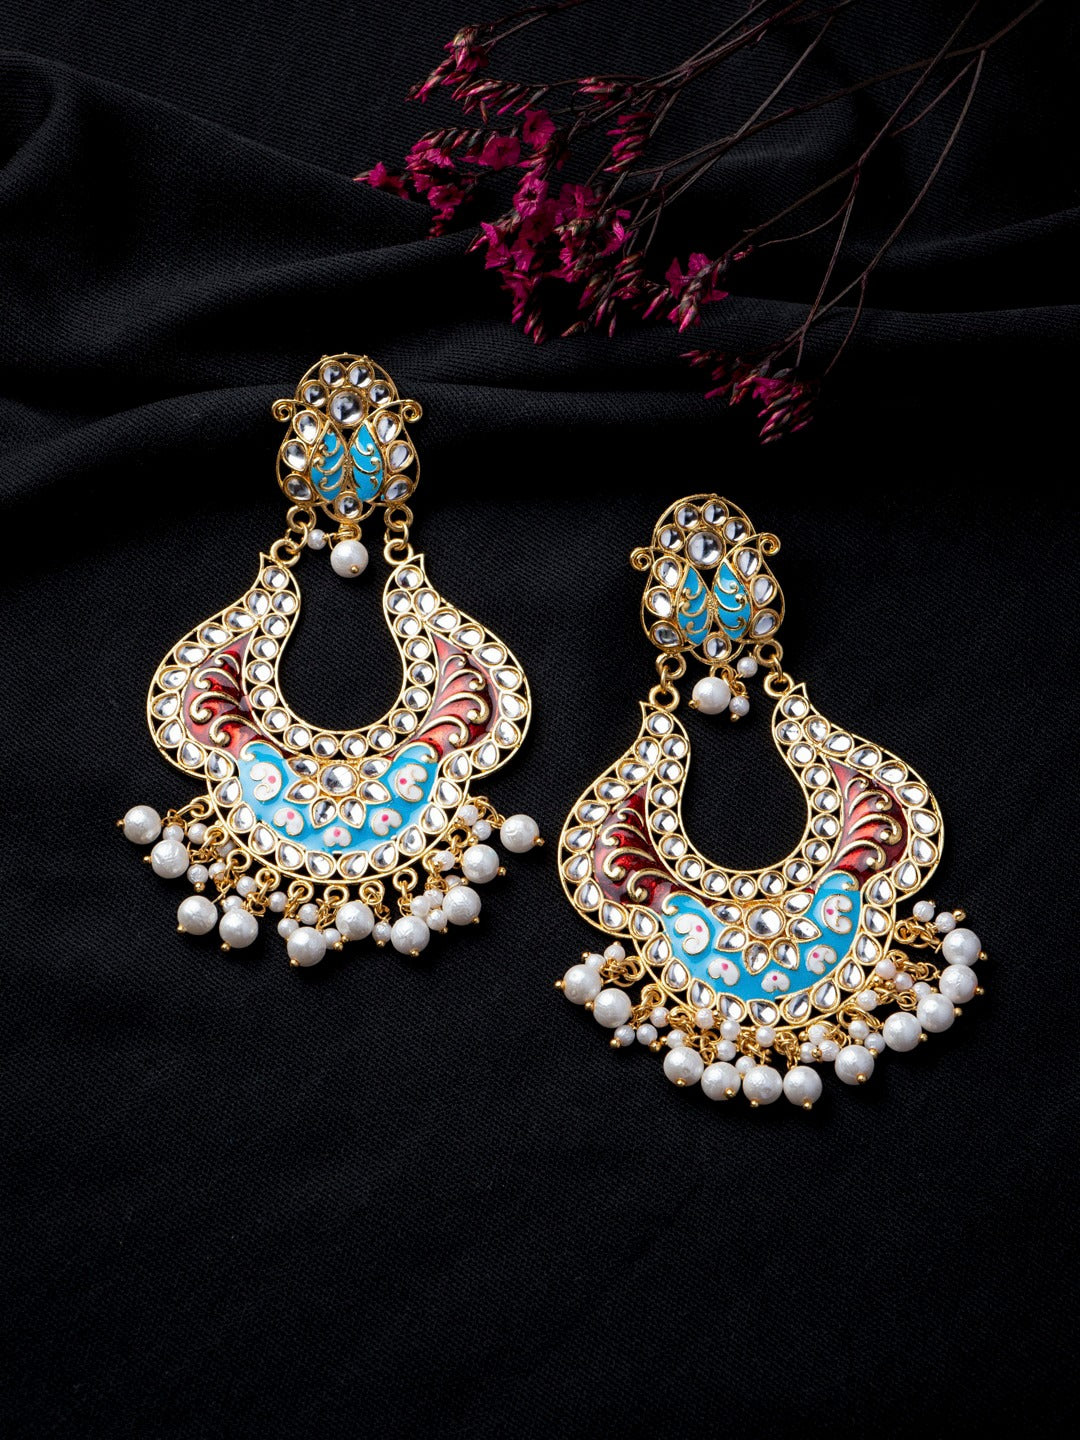 Women's Turquoise Blue Contemporary Chandbalis Earrings - Morkanth